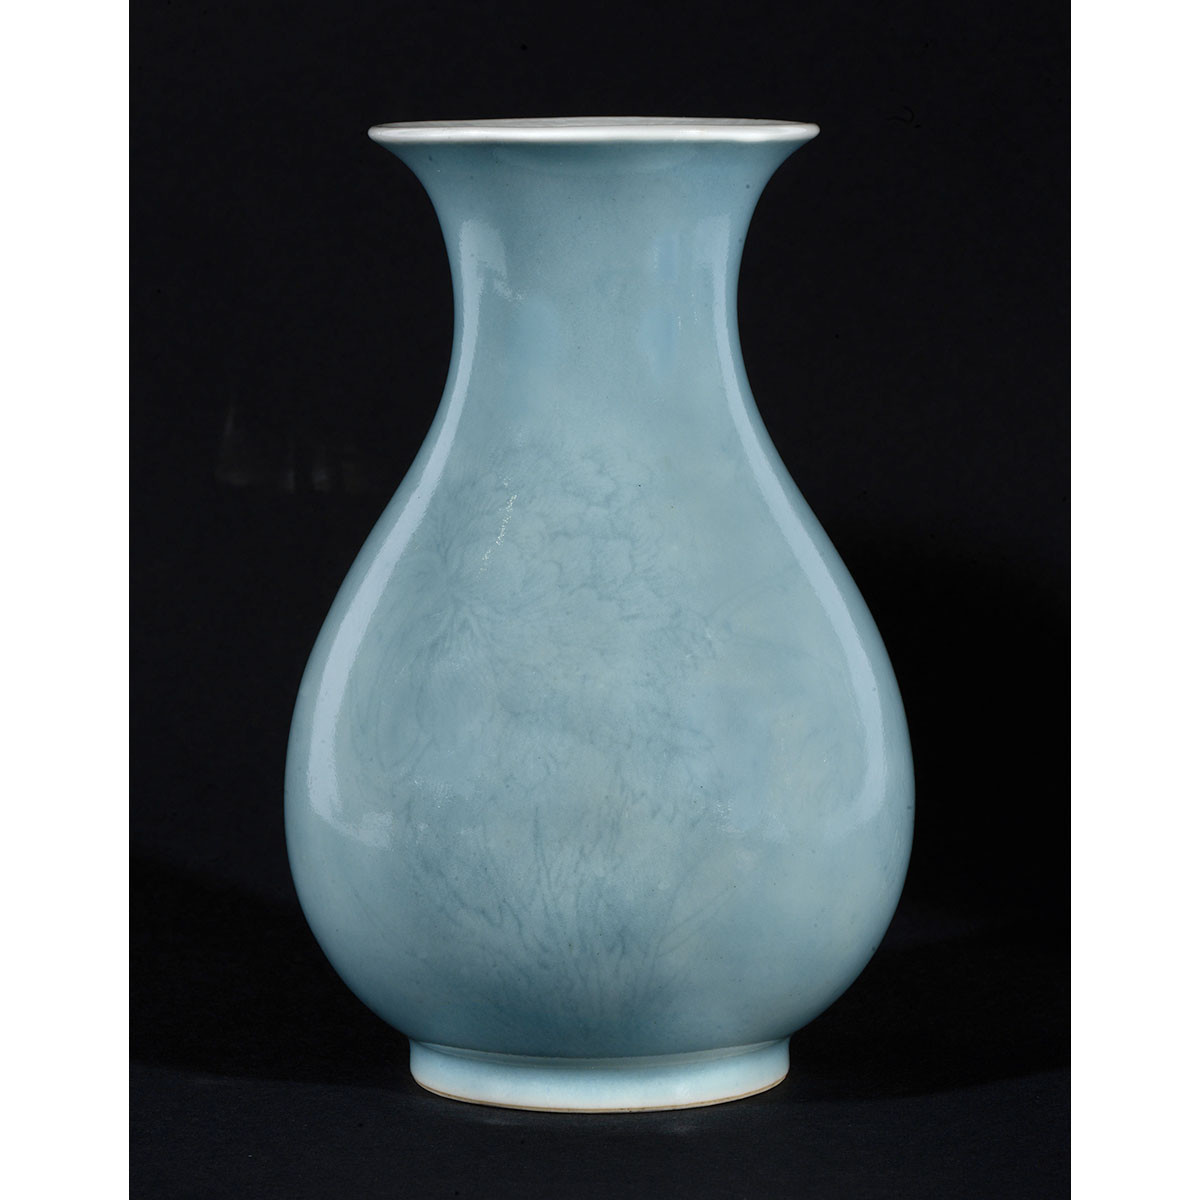 27 Recommended Chinese Meiping Vase 2024 free download chinese meiping vase of arts dasie millon riviera gauchet asian art regarding lot 171 a qianlong marked chinese 19th c qing dynasty clair de lune glazed and anhua decorated yuhuchuping